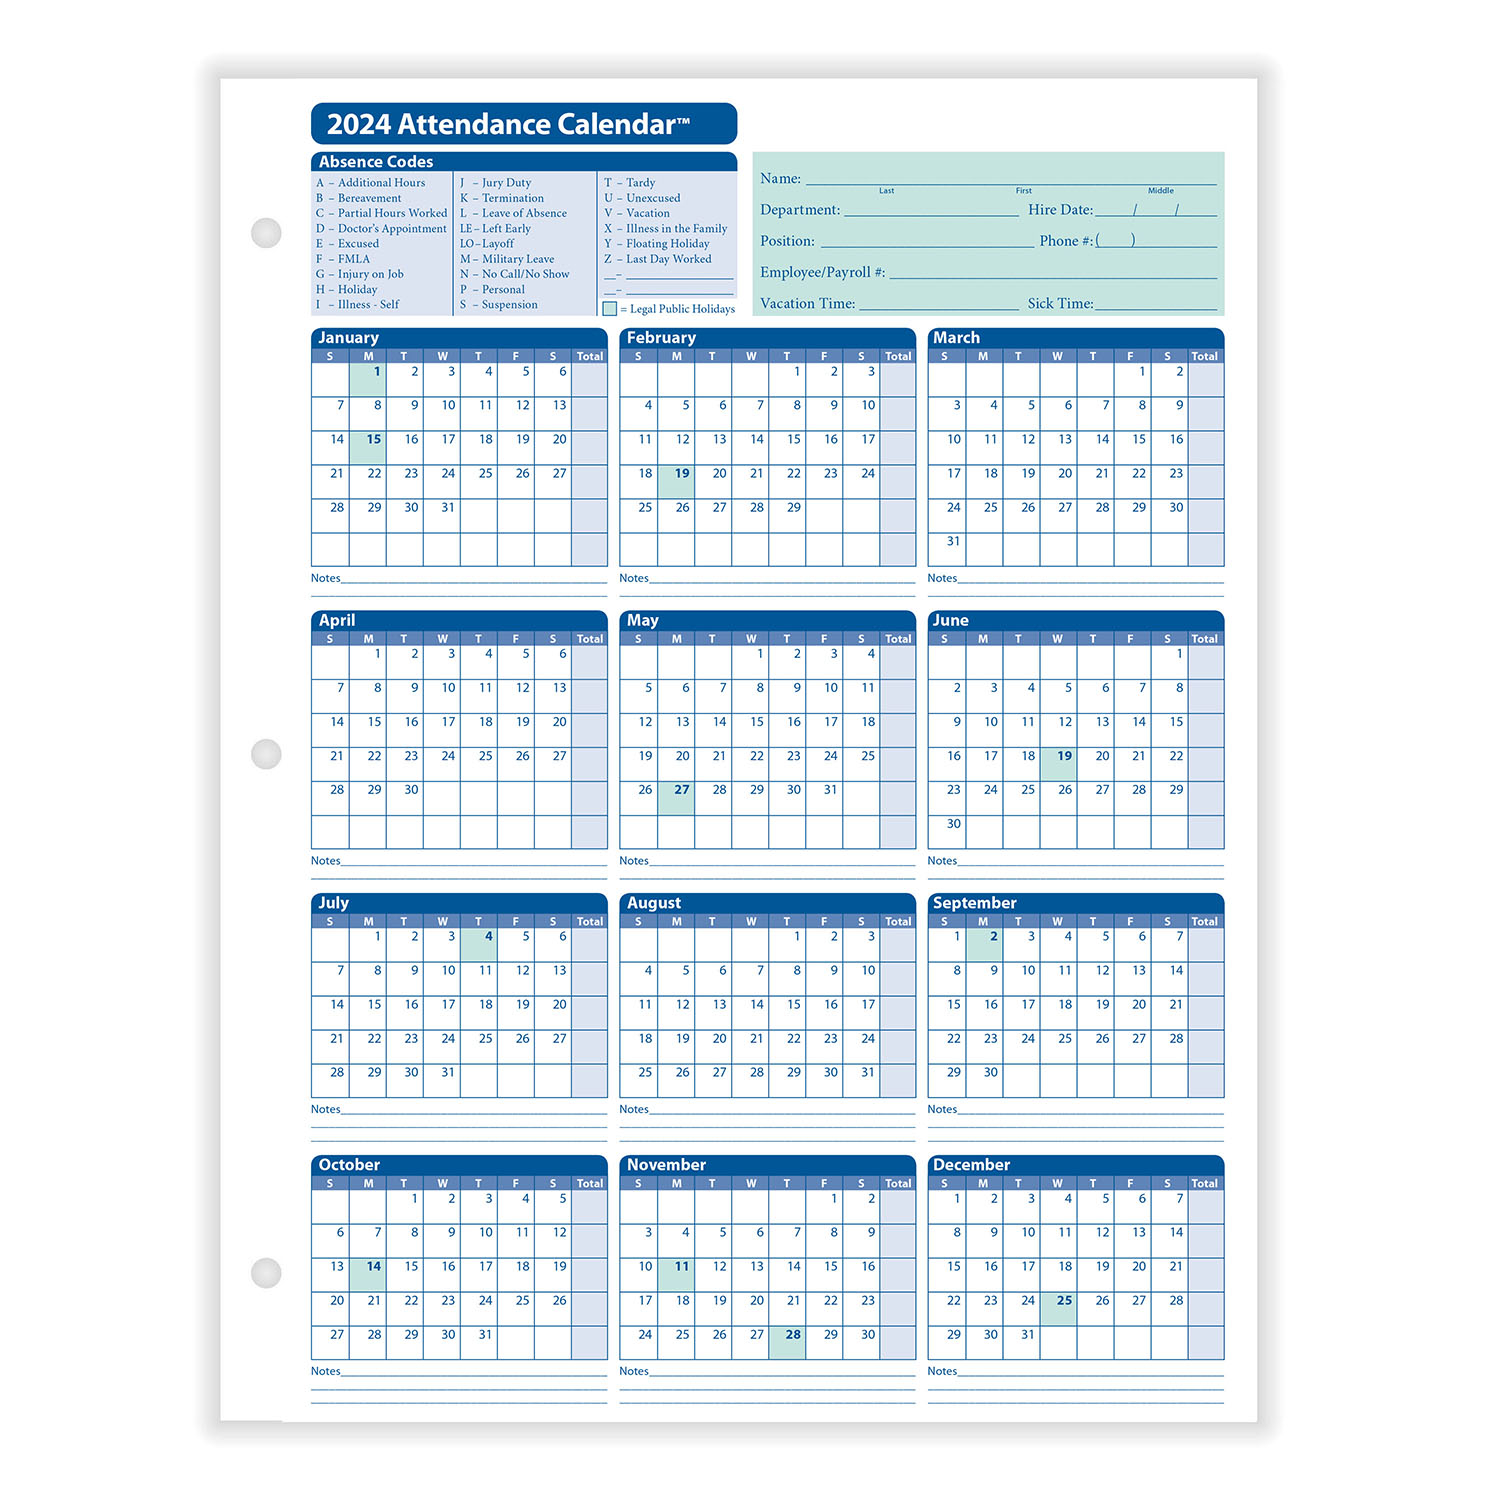 2024 Yearly Employee Attendance Calendar | Yearly Calendar | Hrdirect intended for Attendance Calendar 2024 Free Printable